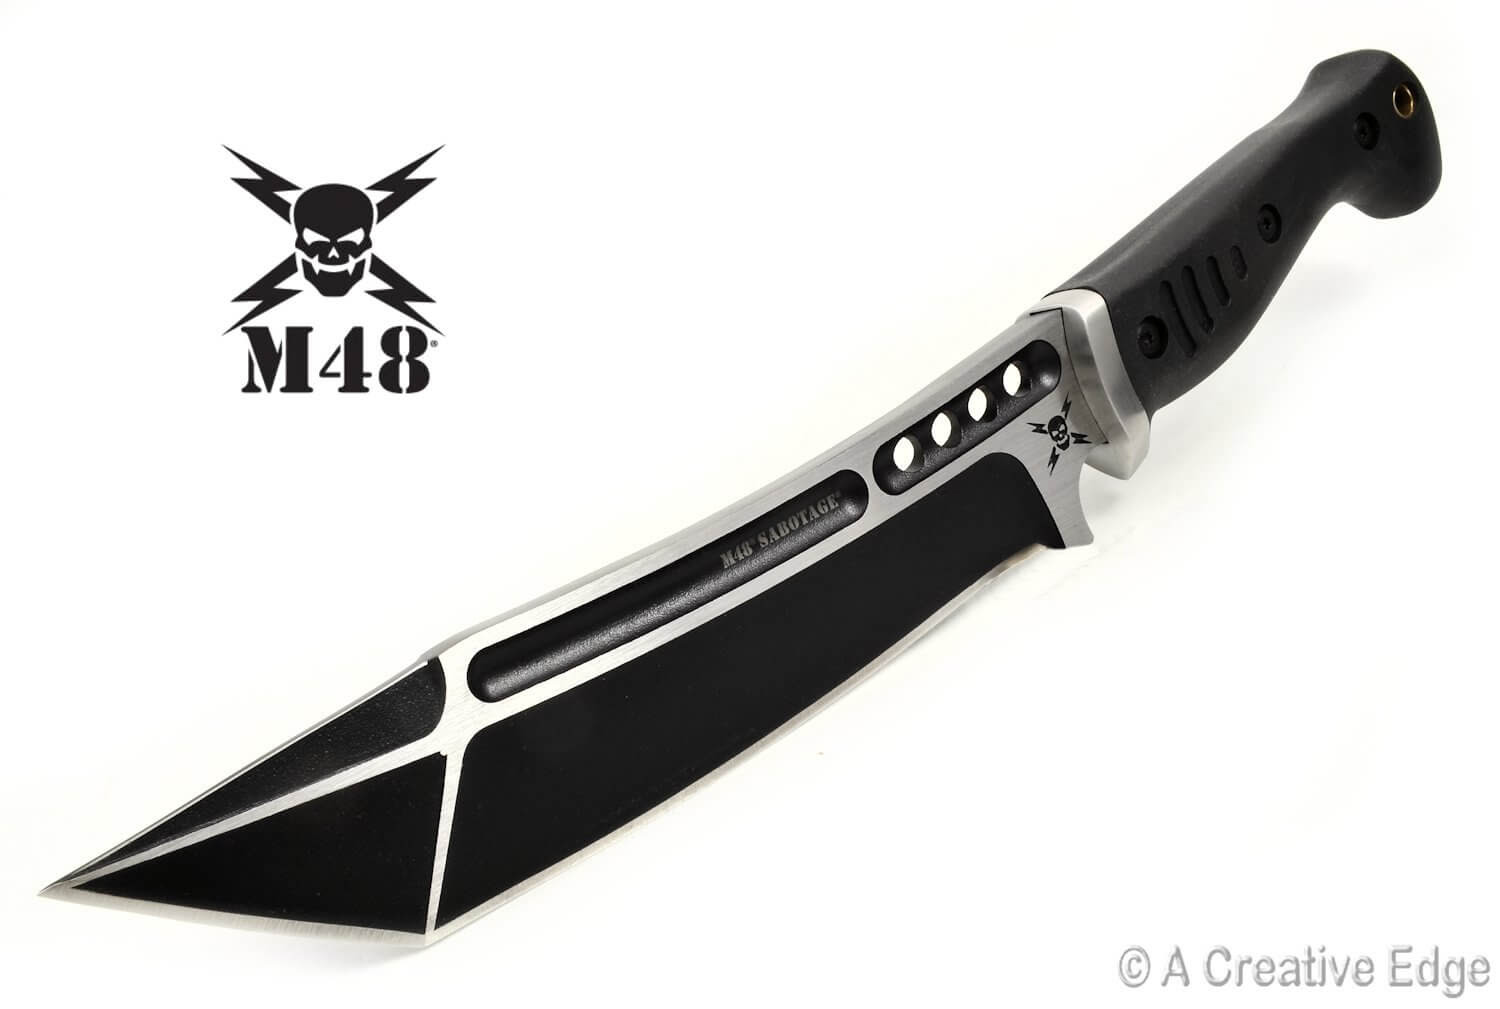  M48 Sabotage Tanto Tactical Fighter Survival Knife Axe w Sheath | eBay